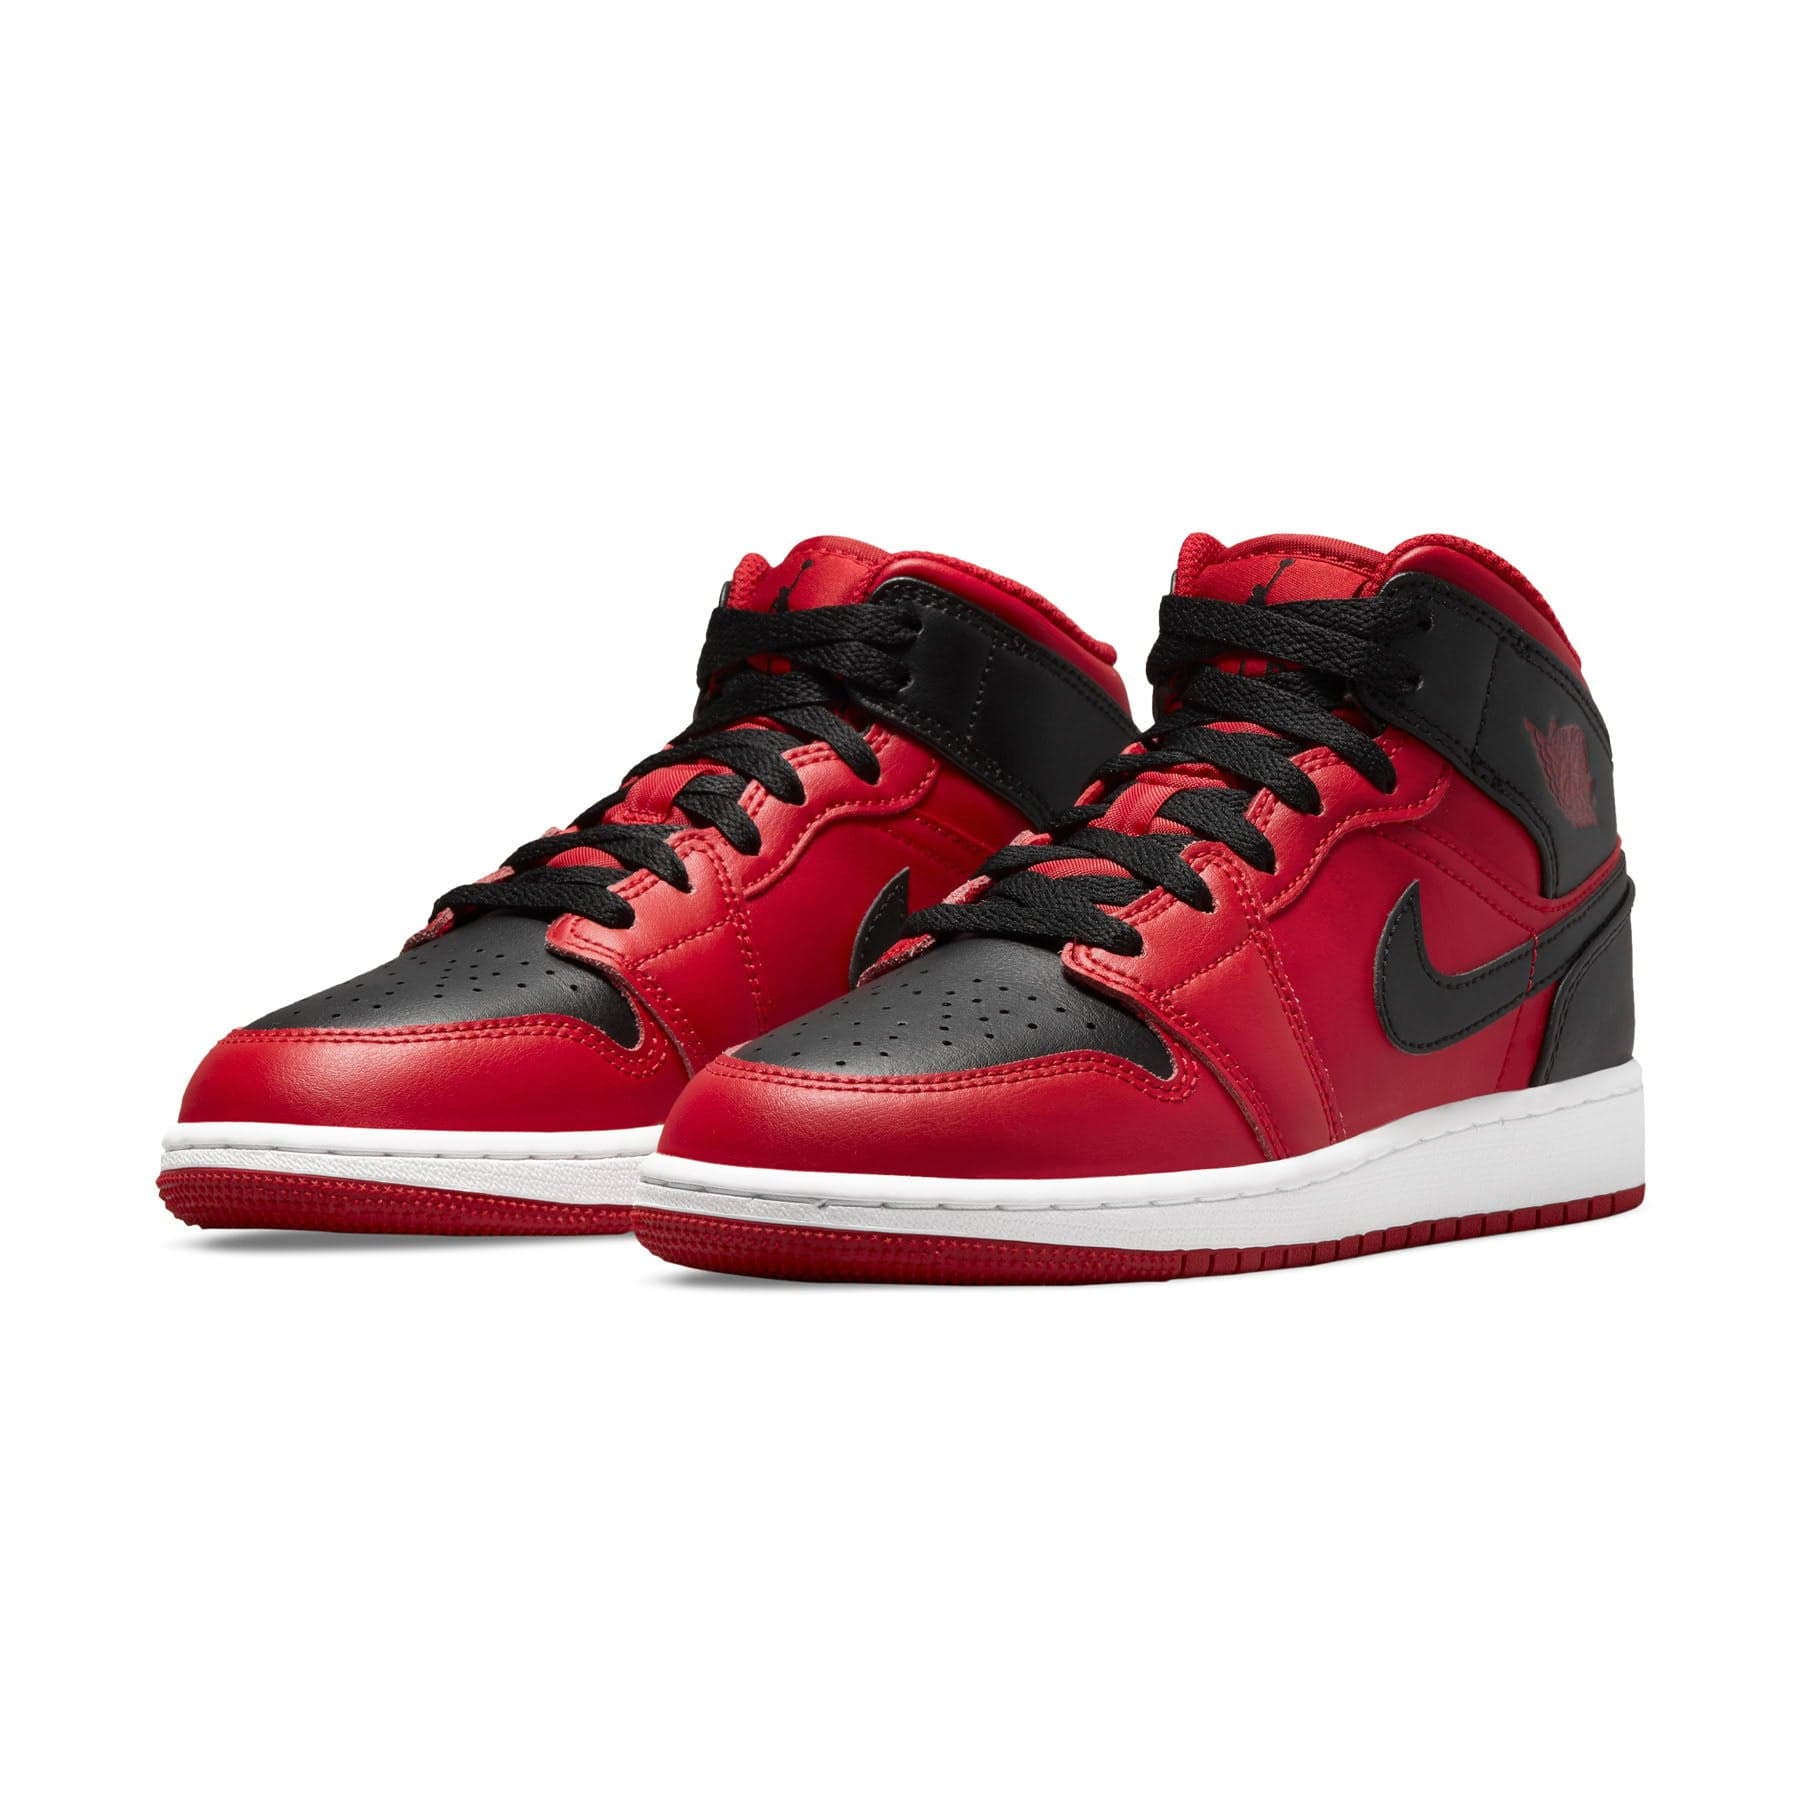 Double Boxed  149.99 Nike Air Jordan 1 Mid Reverse Bred Double Boxed